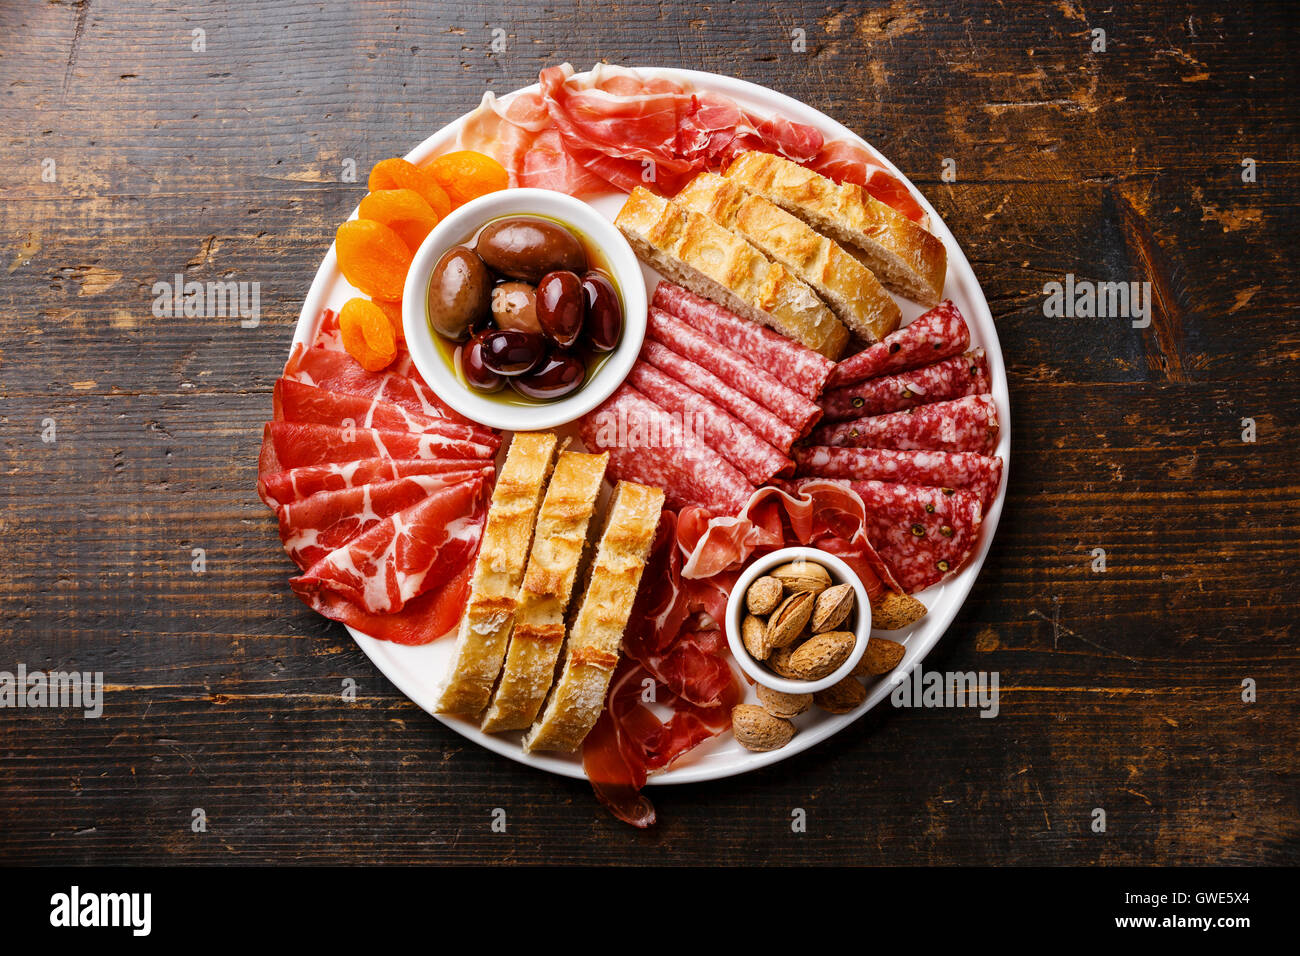 Cold meat plate with prosciutto, salami, ciabatta bread and olives on wooden background Stock Photo